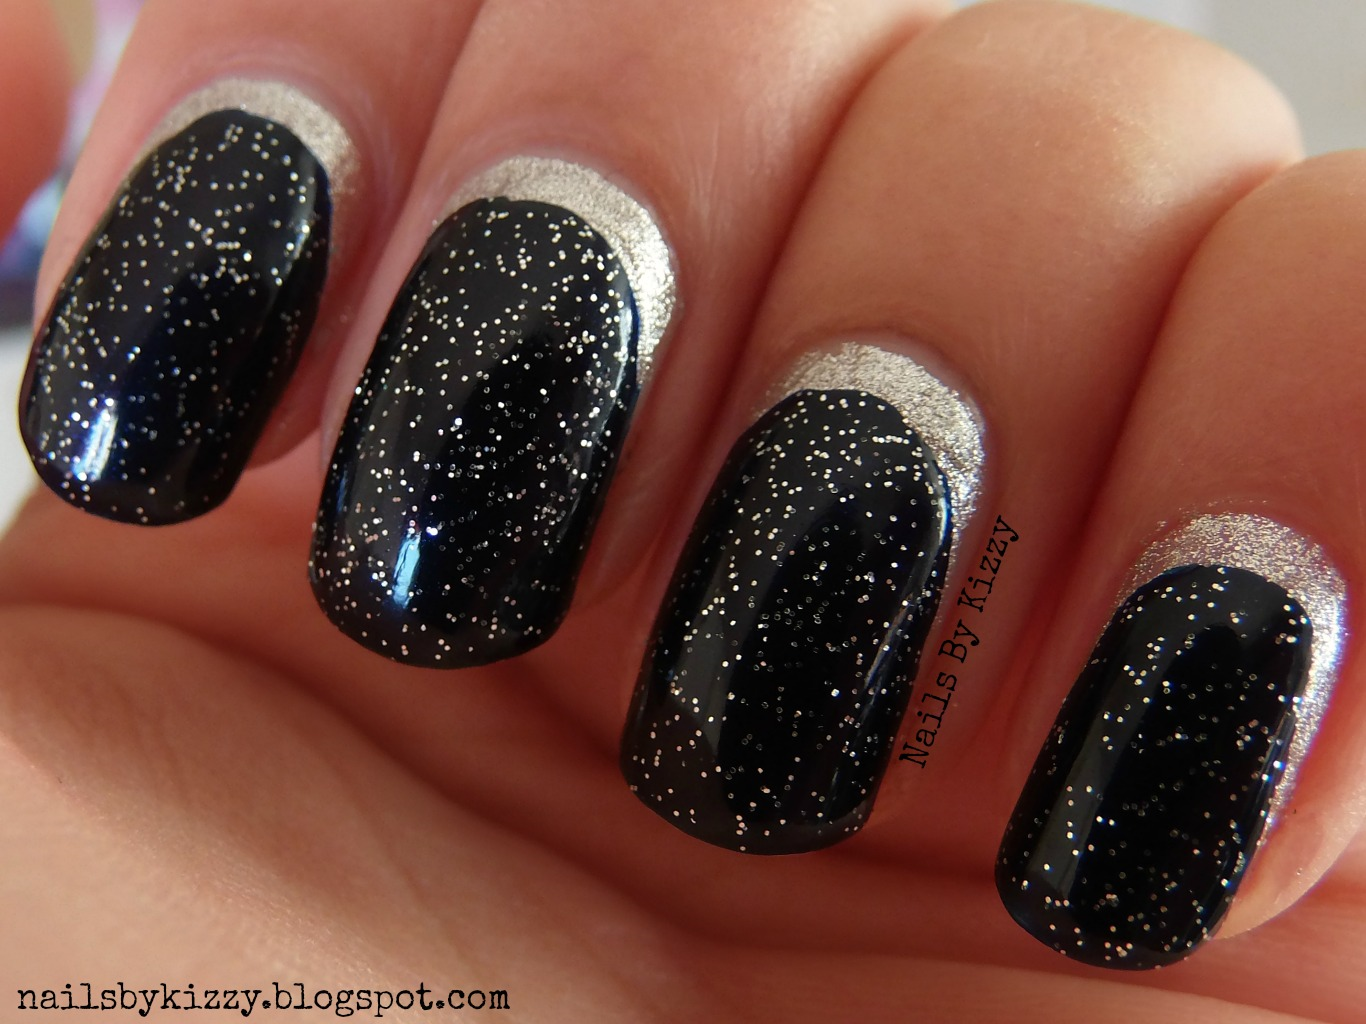 Nails By Kizzy: Glittery Crescent Moon Nails!